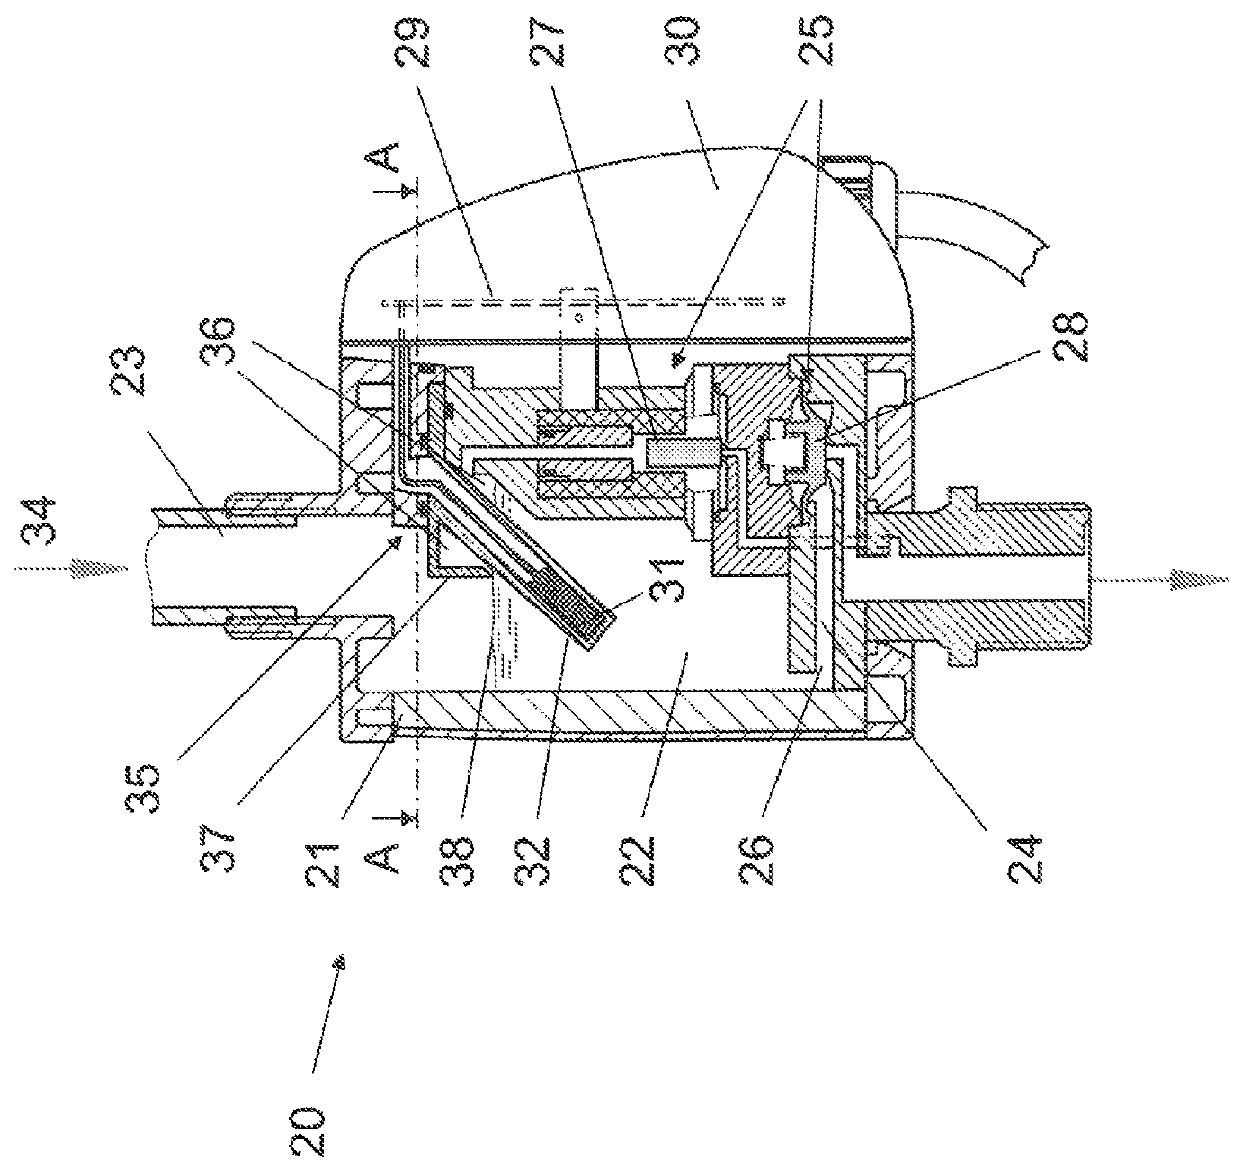 Condensate discharge device for compressed gas systems